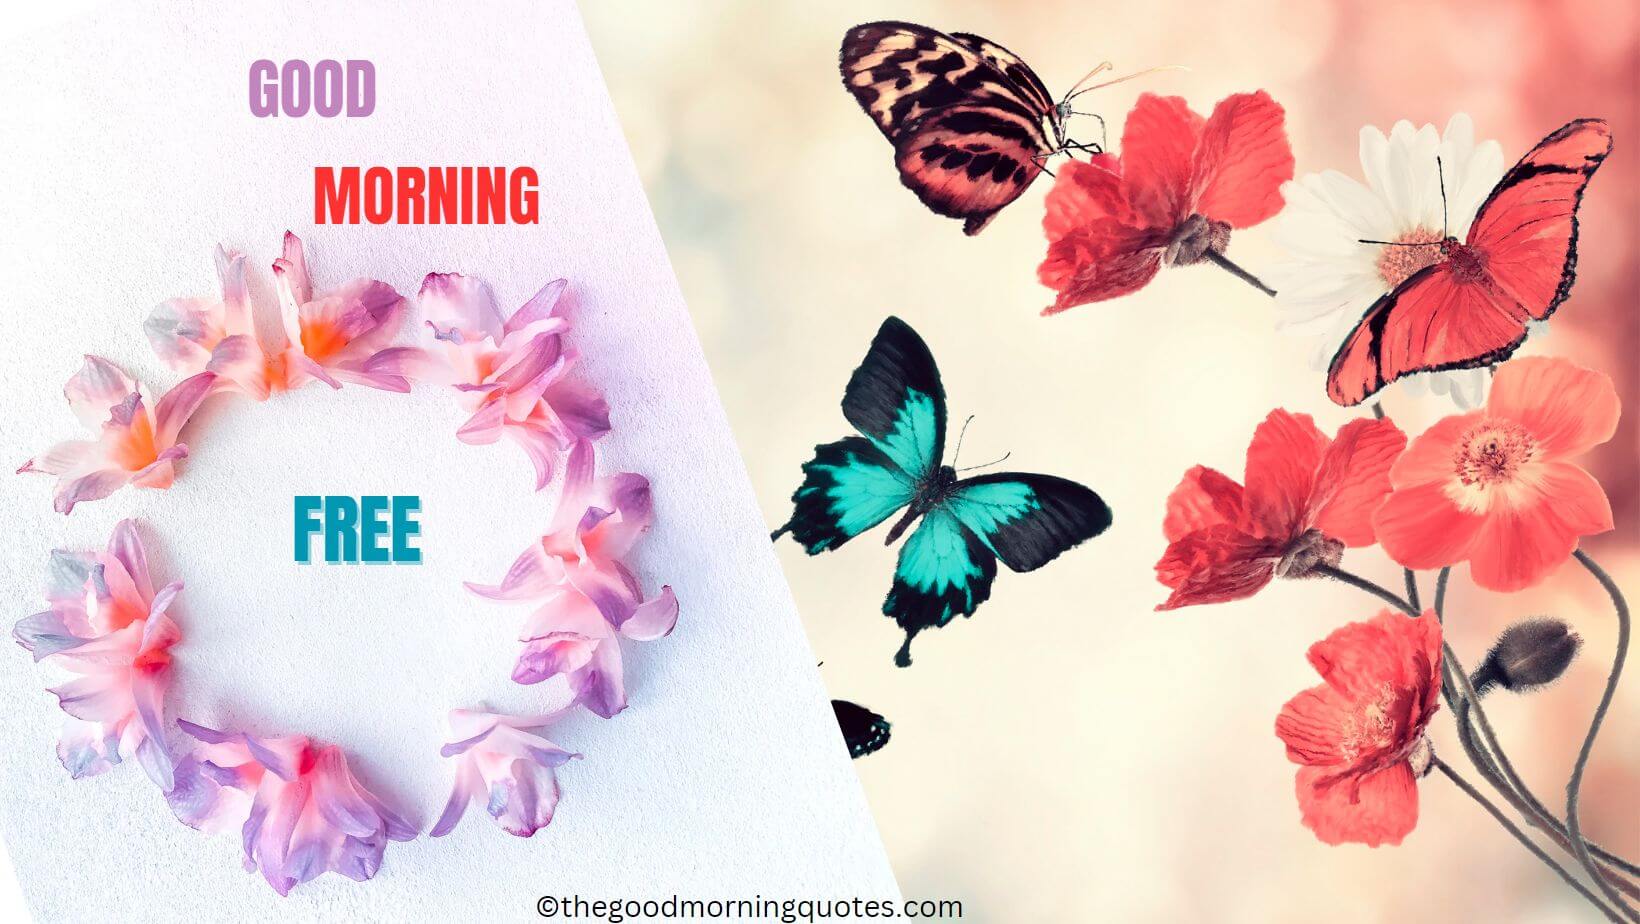 FREE GOOD MORNING QUOTES